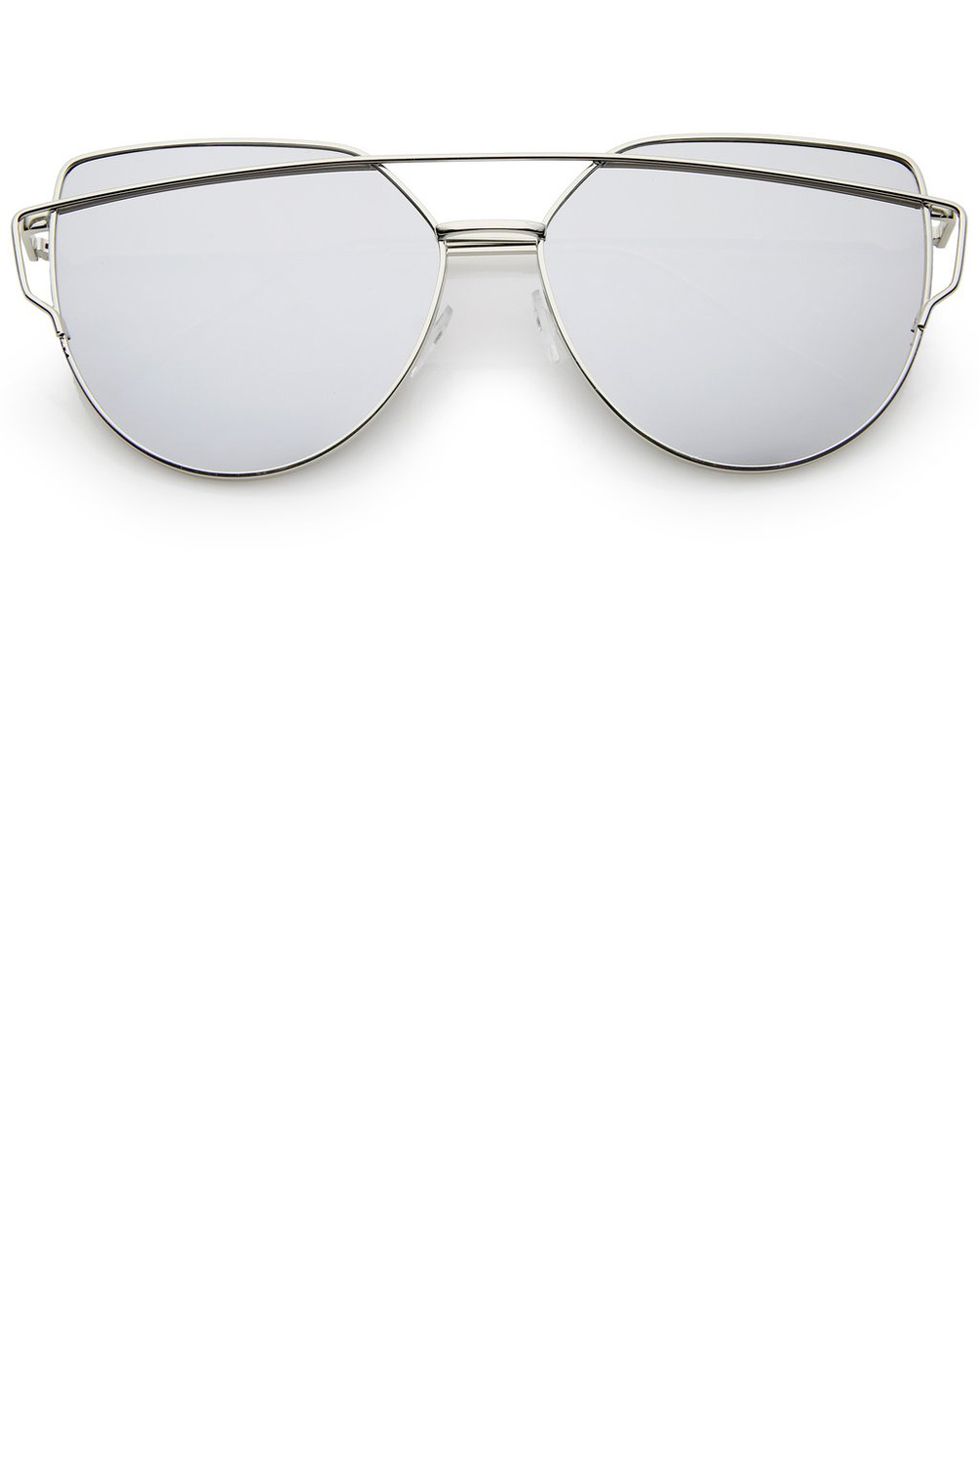 <p><strong>Zero UV</strong> sunglasses, $11, <a href="http://www.shopzerouv.com/collections/womens-sunglasses-1/products/womens-oversize-cross-brow-flat-mirrored-lens-sunglasses-a546?variant=22090176641" target="_blank">shopzerouv.com</a>. </p>